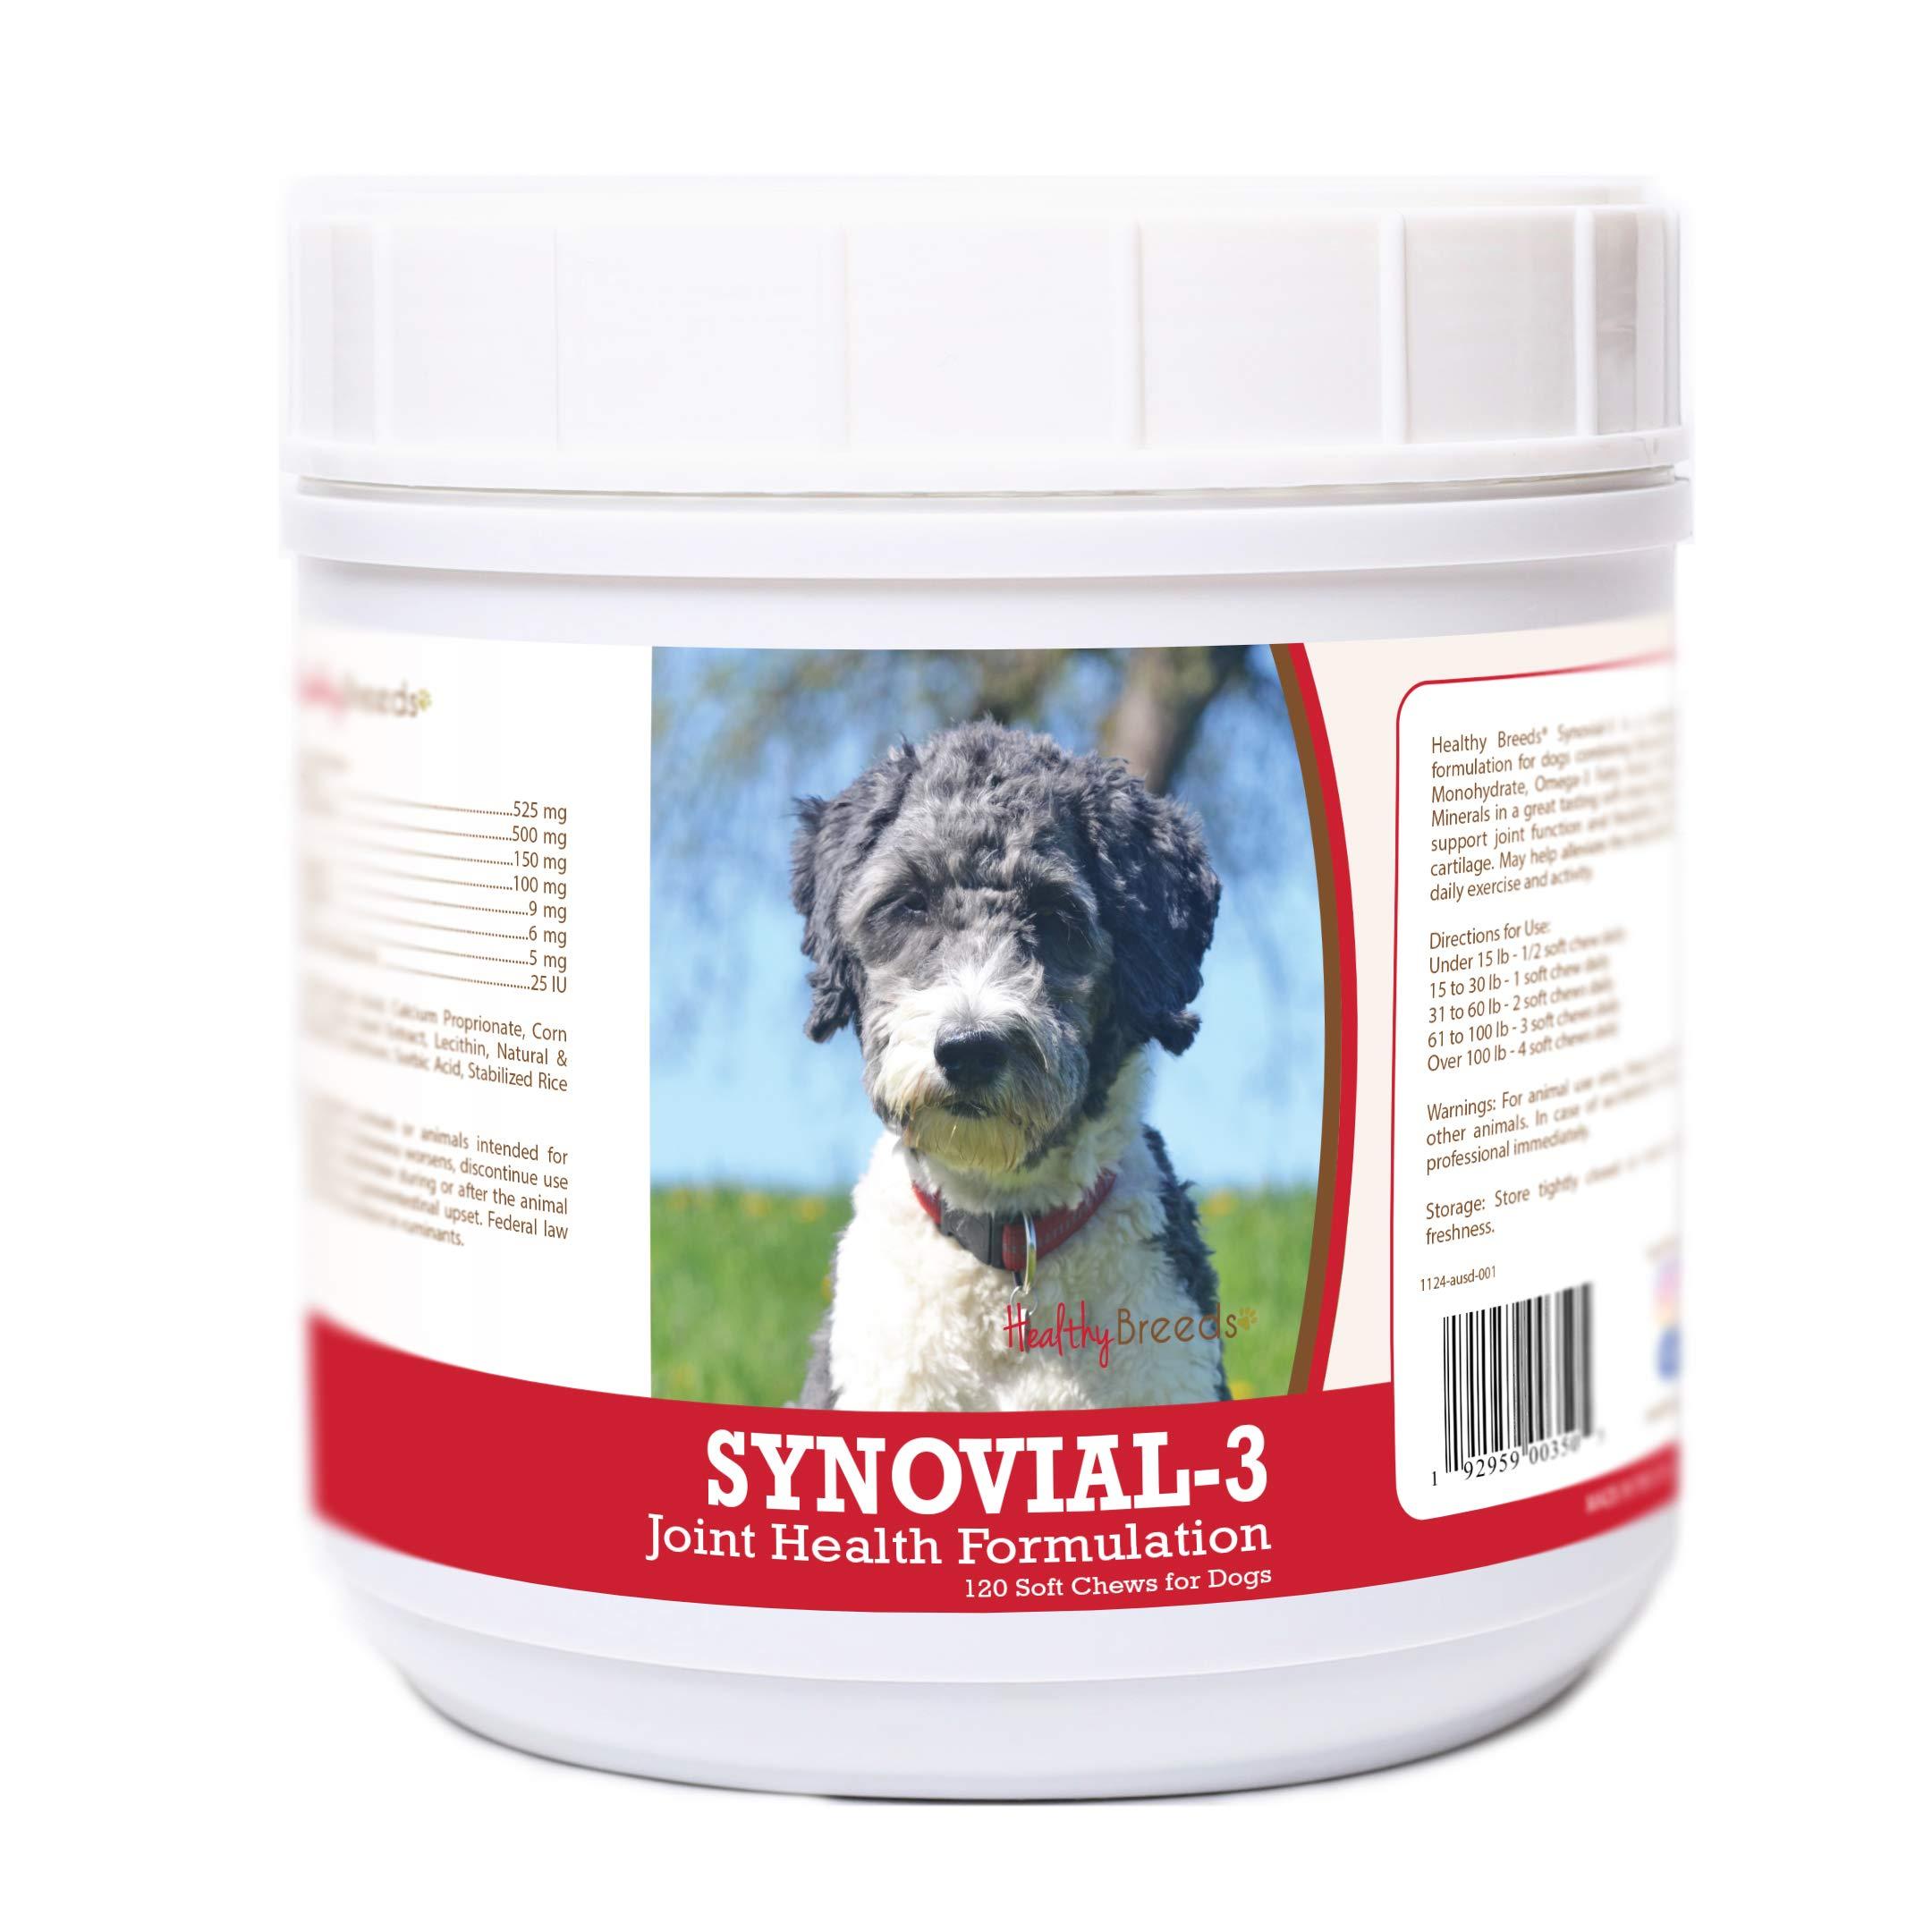 Healthy Breeds Aussiedoodle Synovial-3 Joint Health Formulation 120 Count